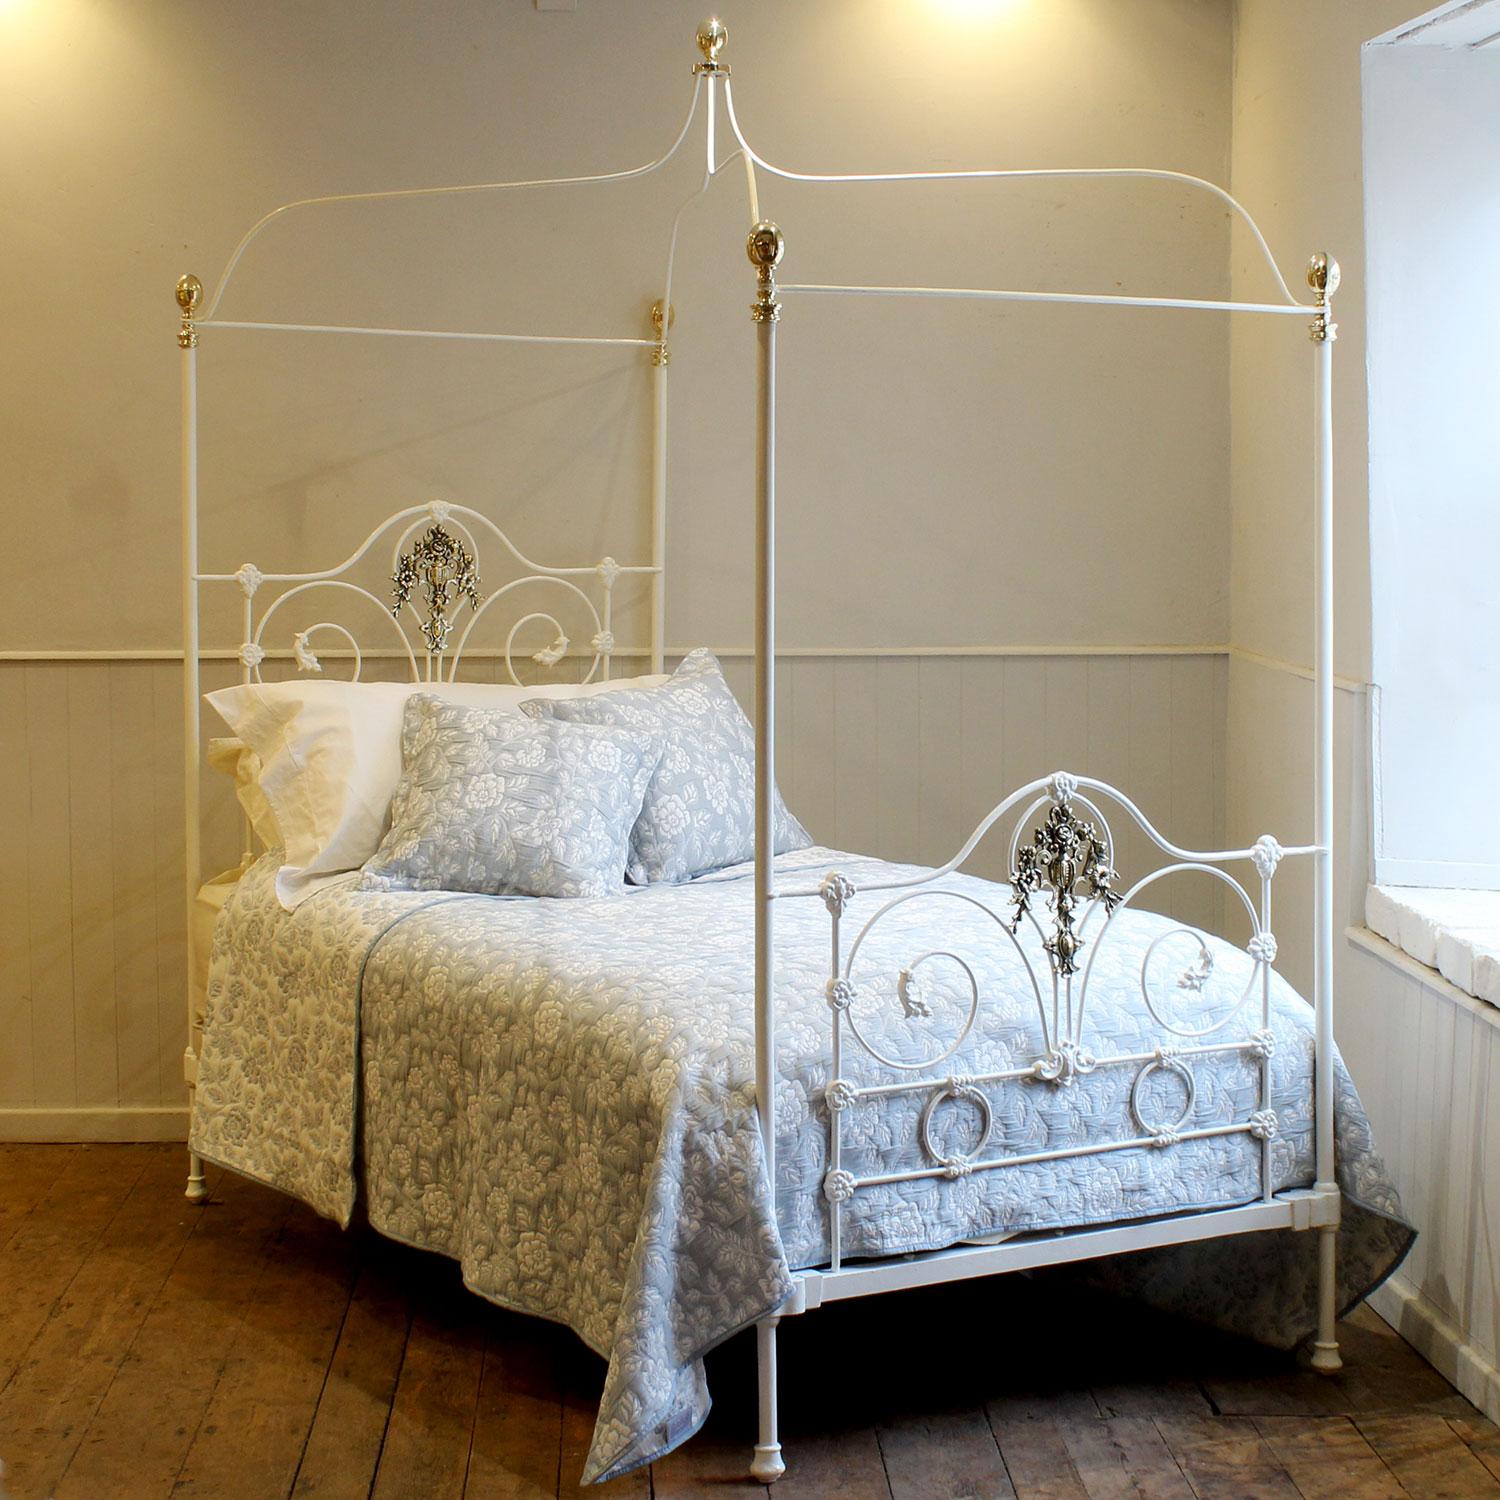 A superb and rare single antique four poster bed with crown and canopy, dating from the late Nineteenth Century. This delicate piece has ornate panels at the head and foot, with decorative castings and central brass plaque depicting an urn with